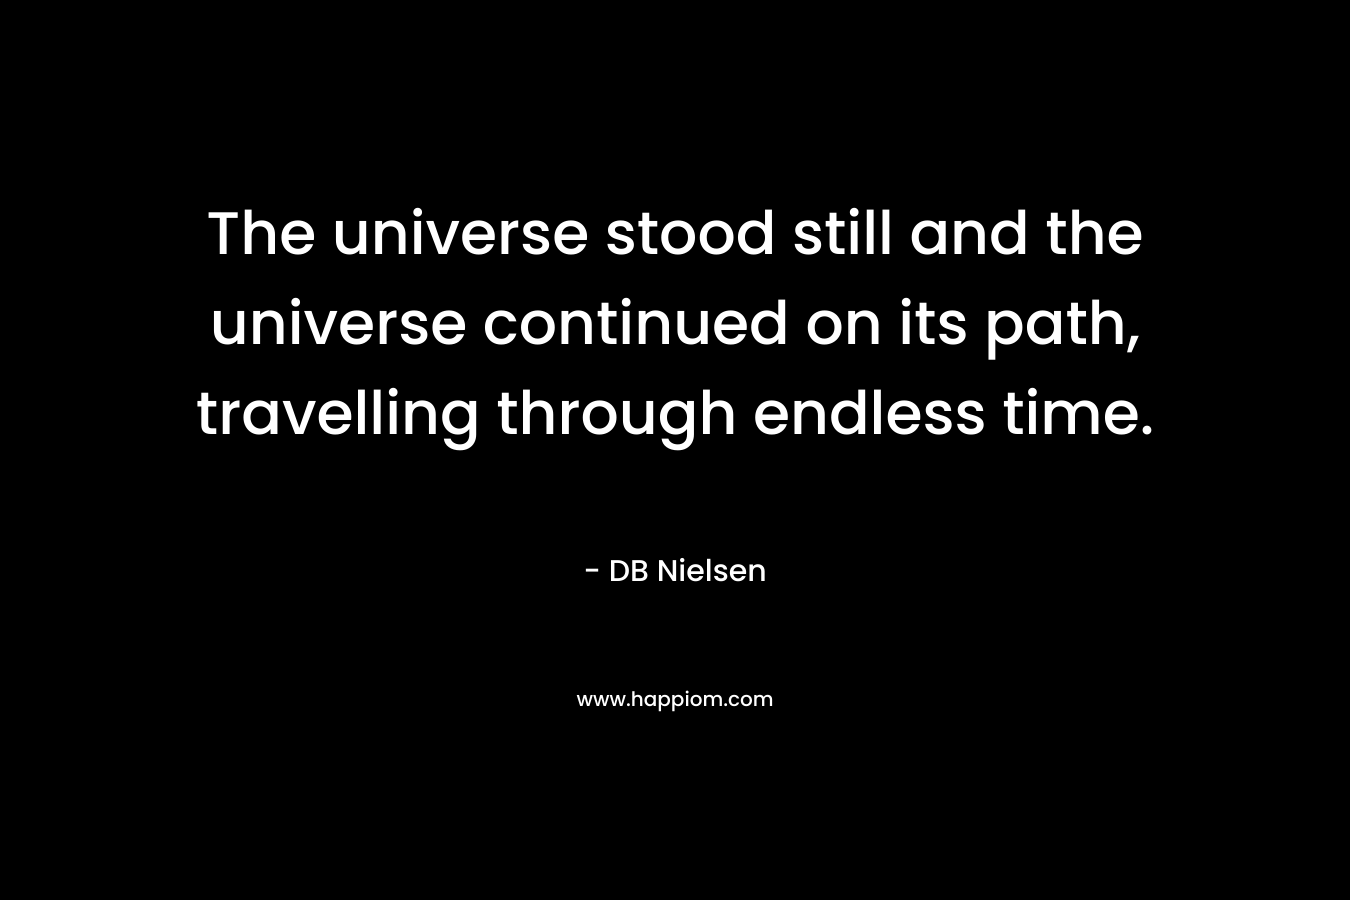 The universe stood still and the universe continued on its path, travelling through endless time. – DB Nielsen